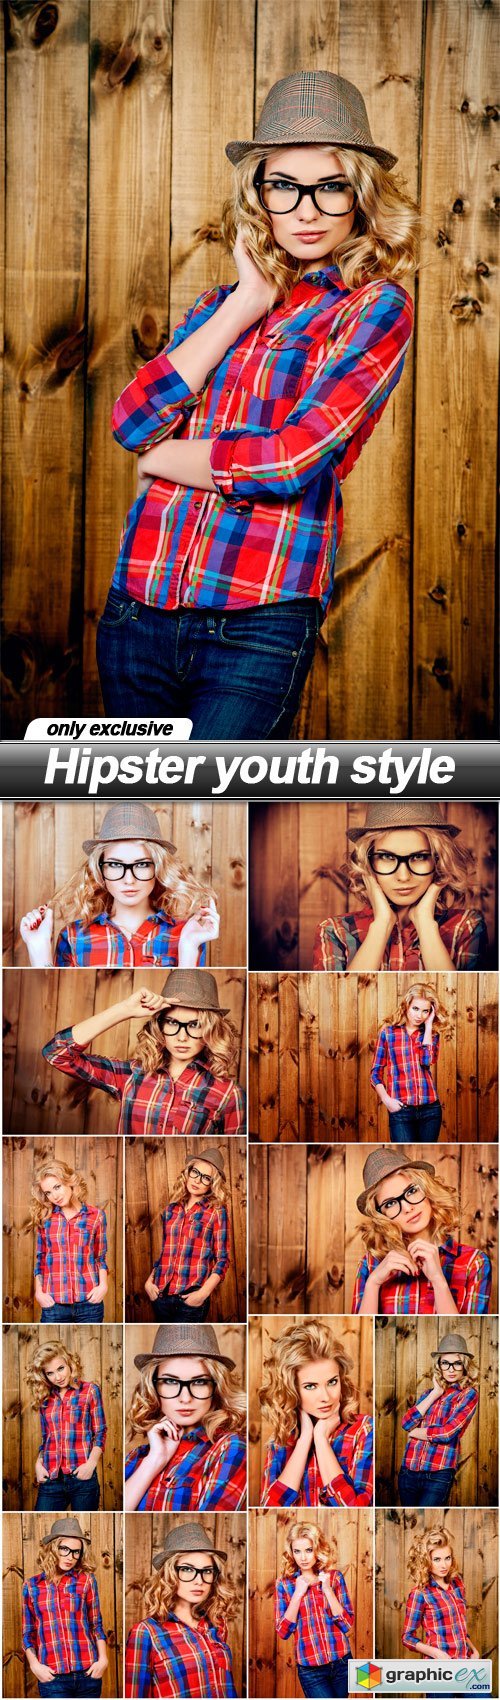 Hipster youth style - 15 UHQ JPEG